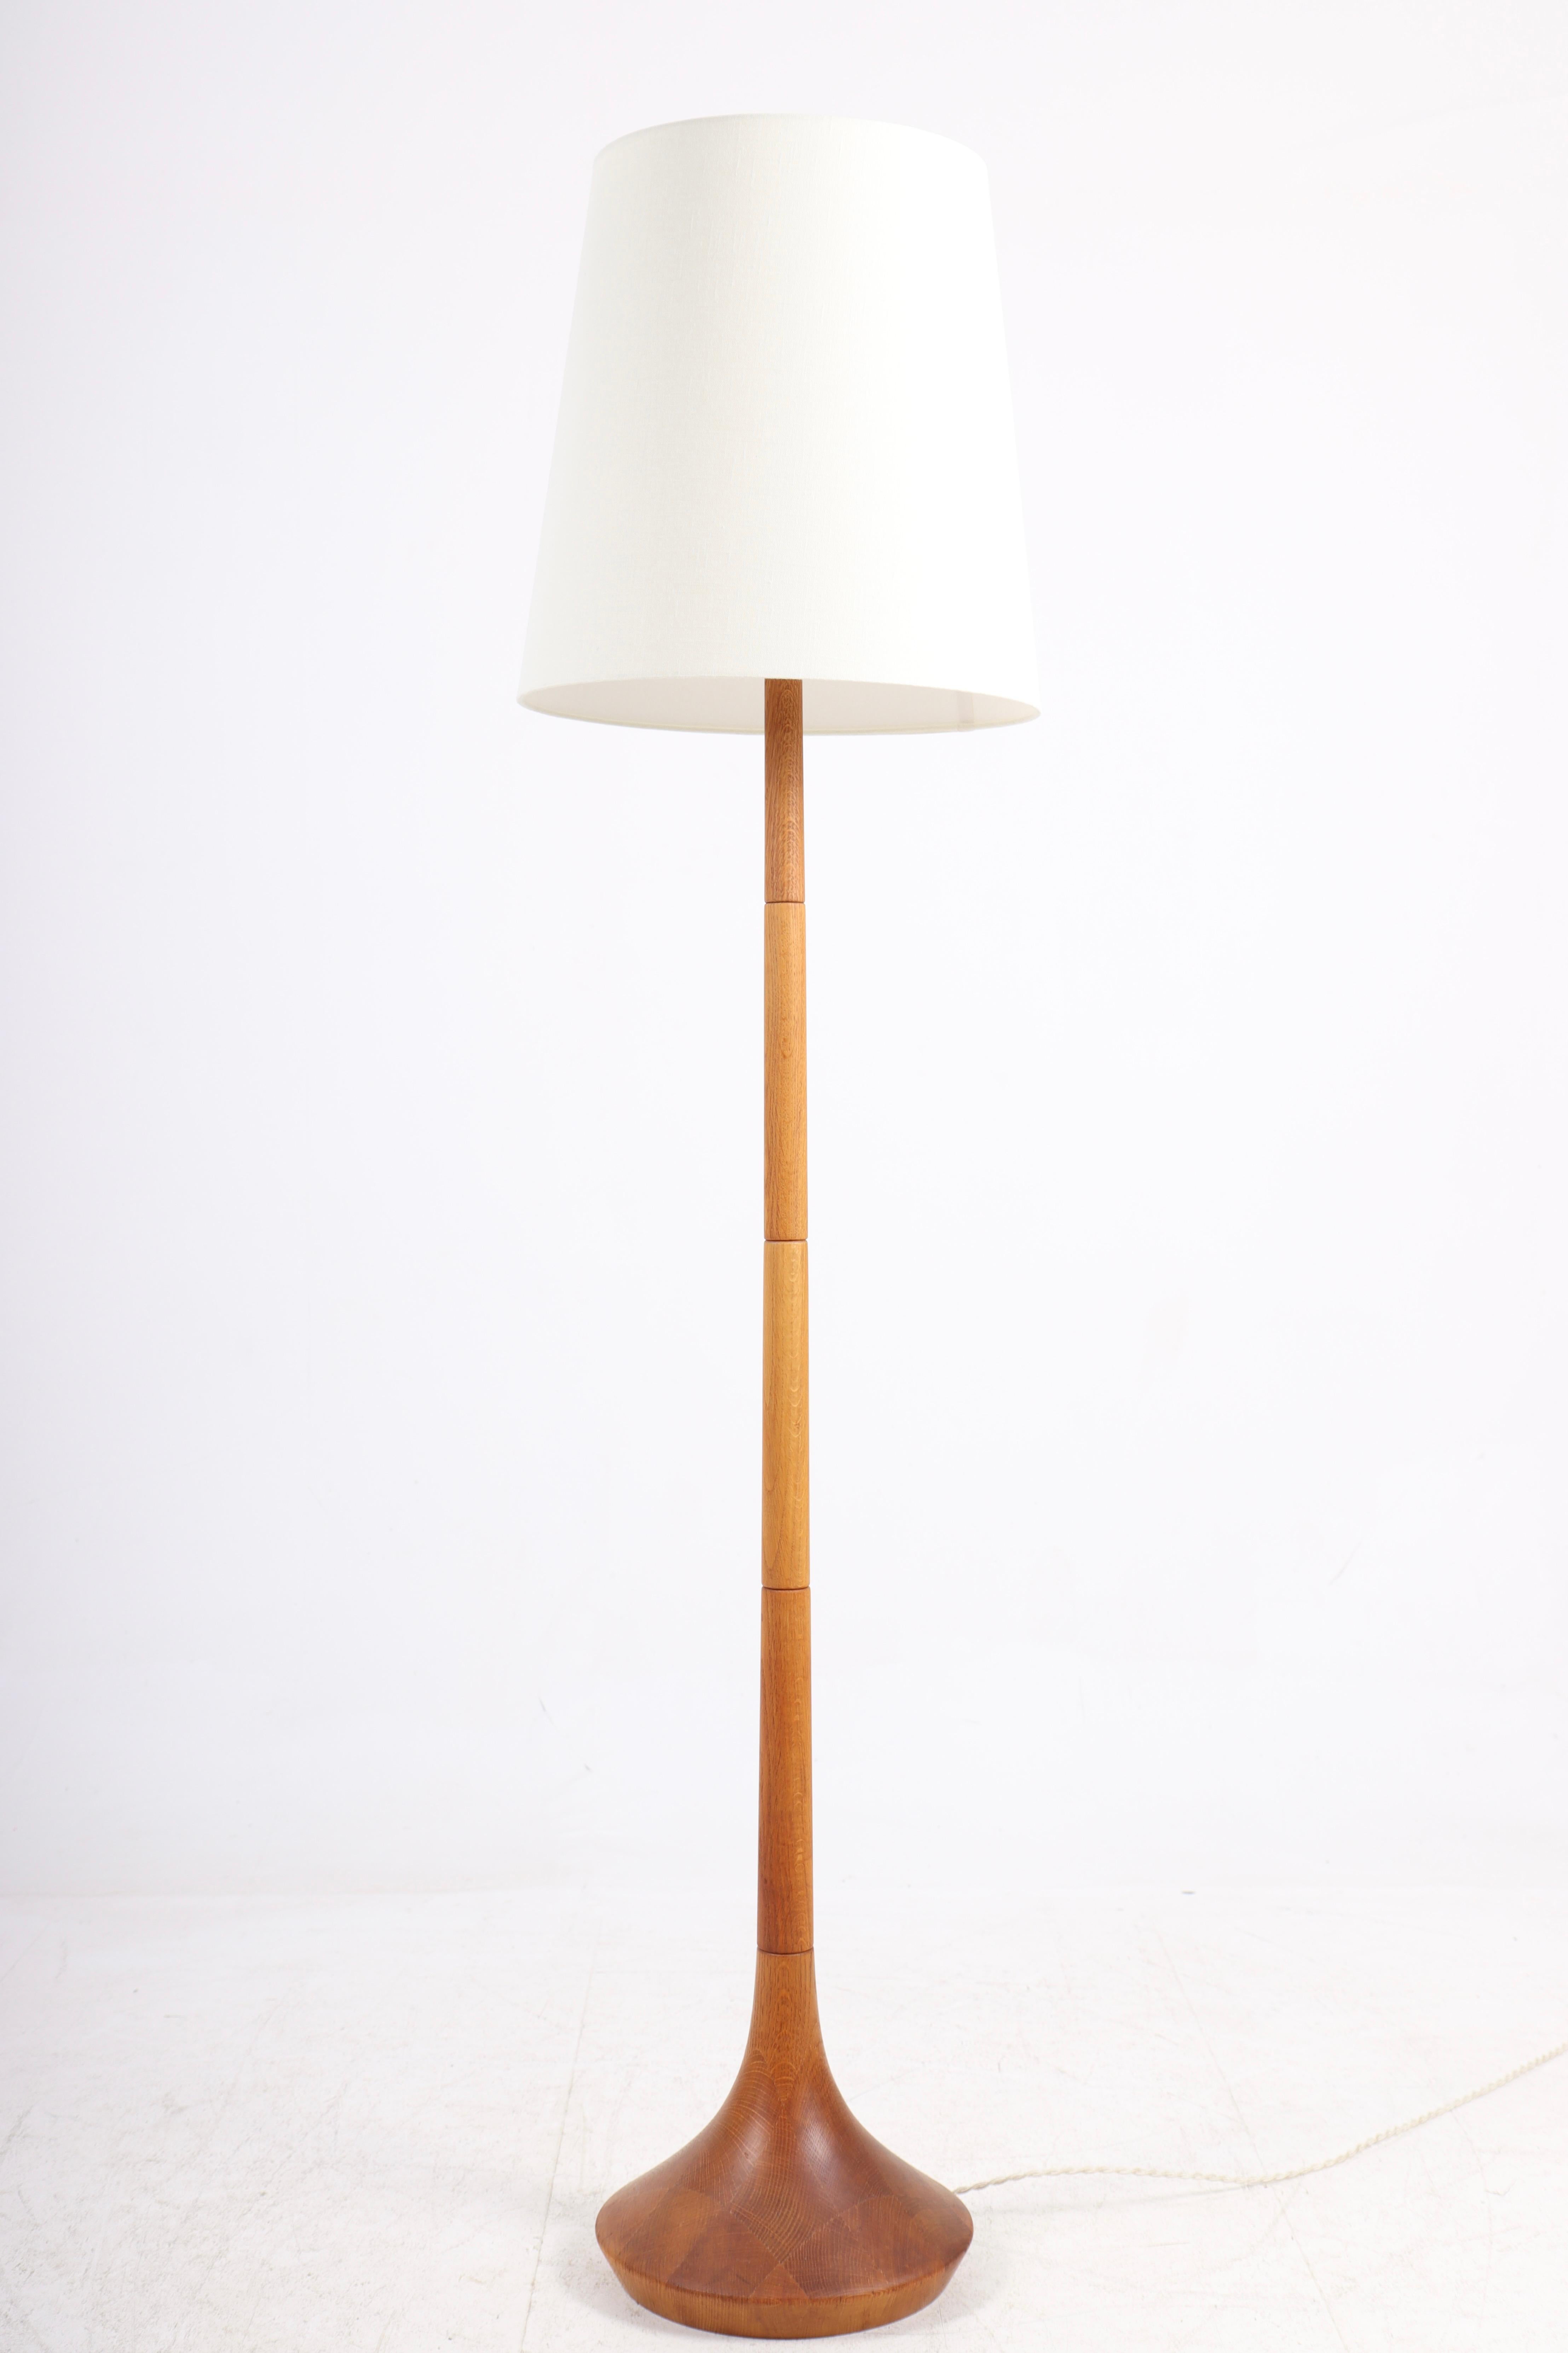 Great looking floor lamp in oak and fabric shade. Designed and made in Denmark.